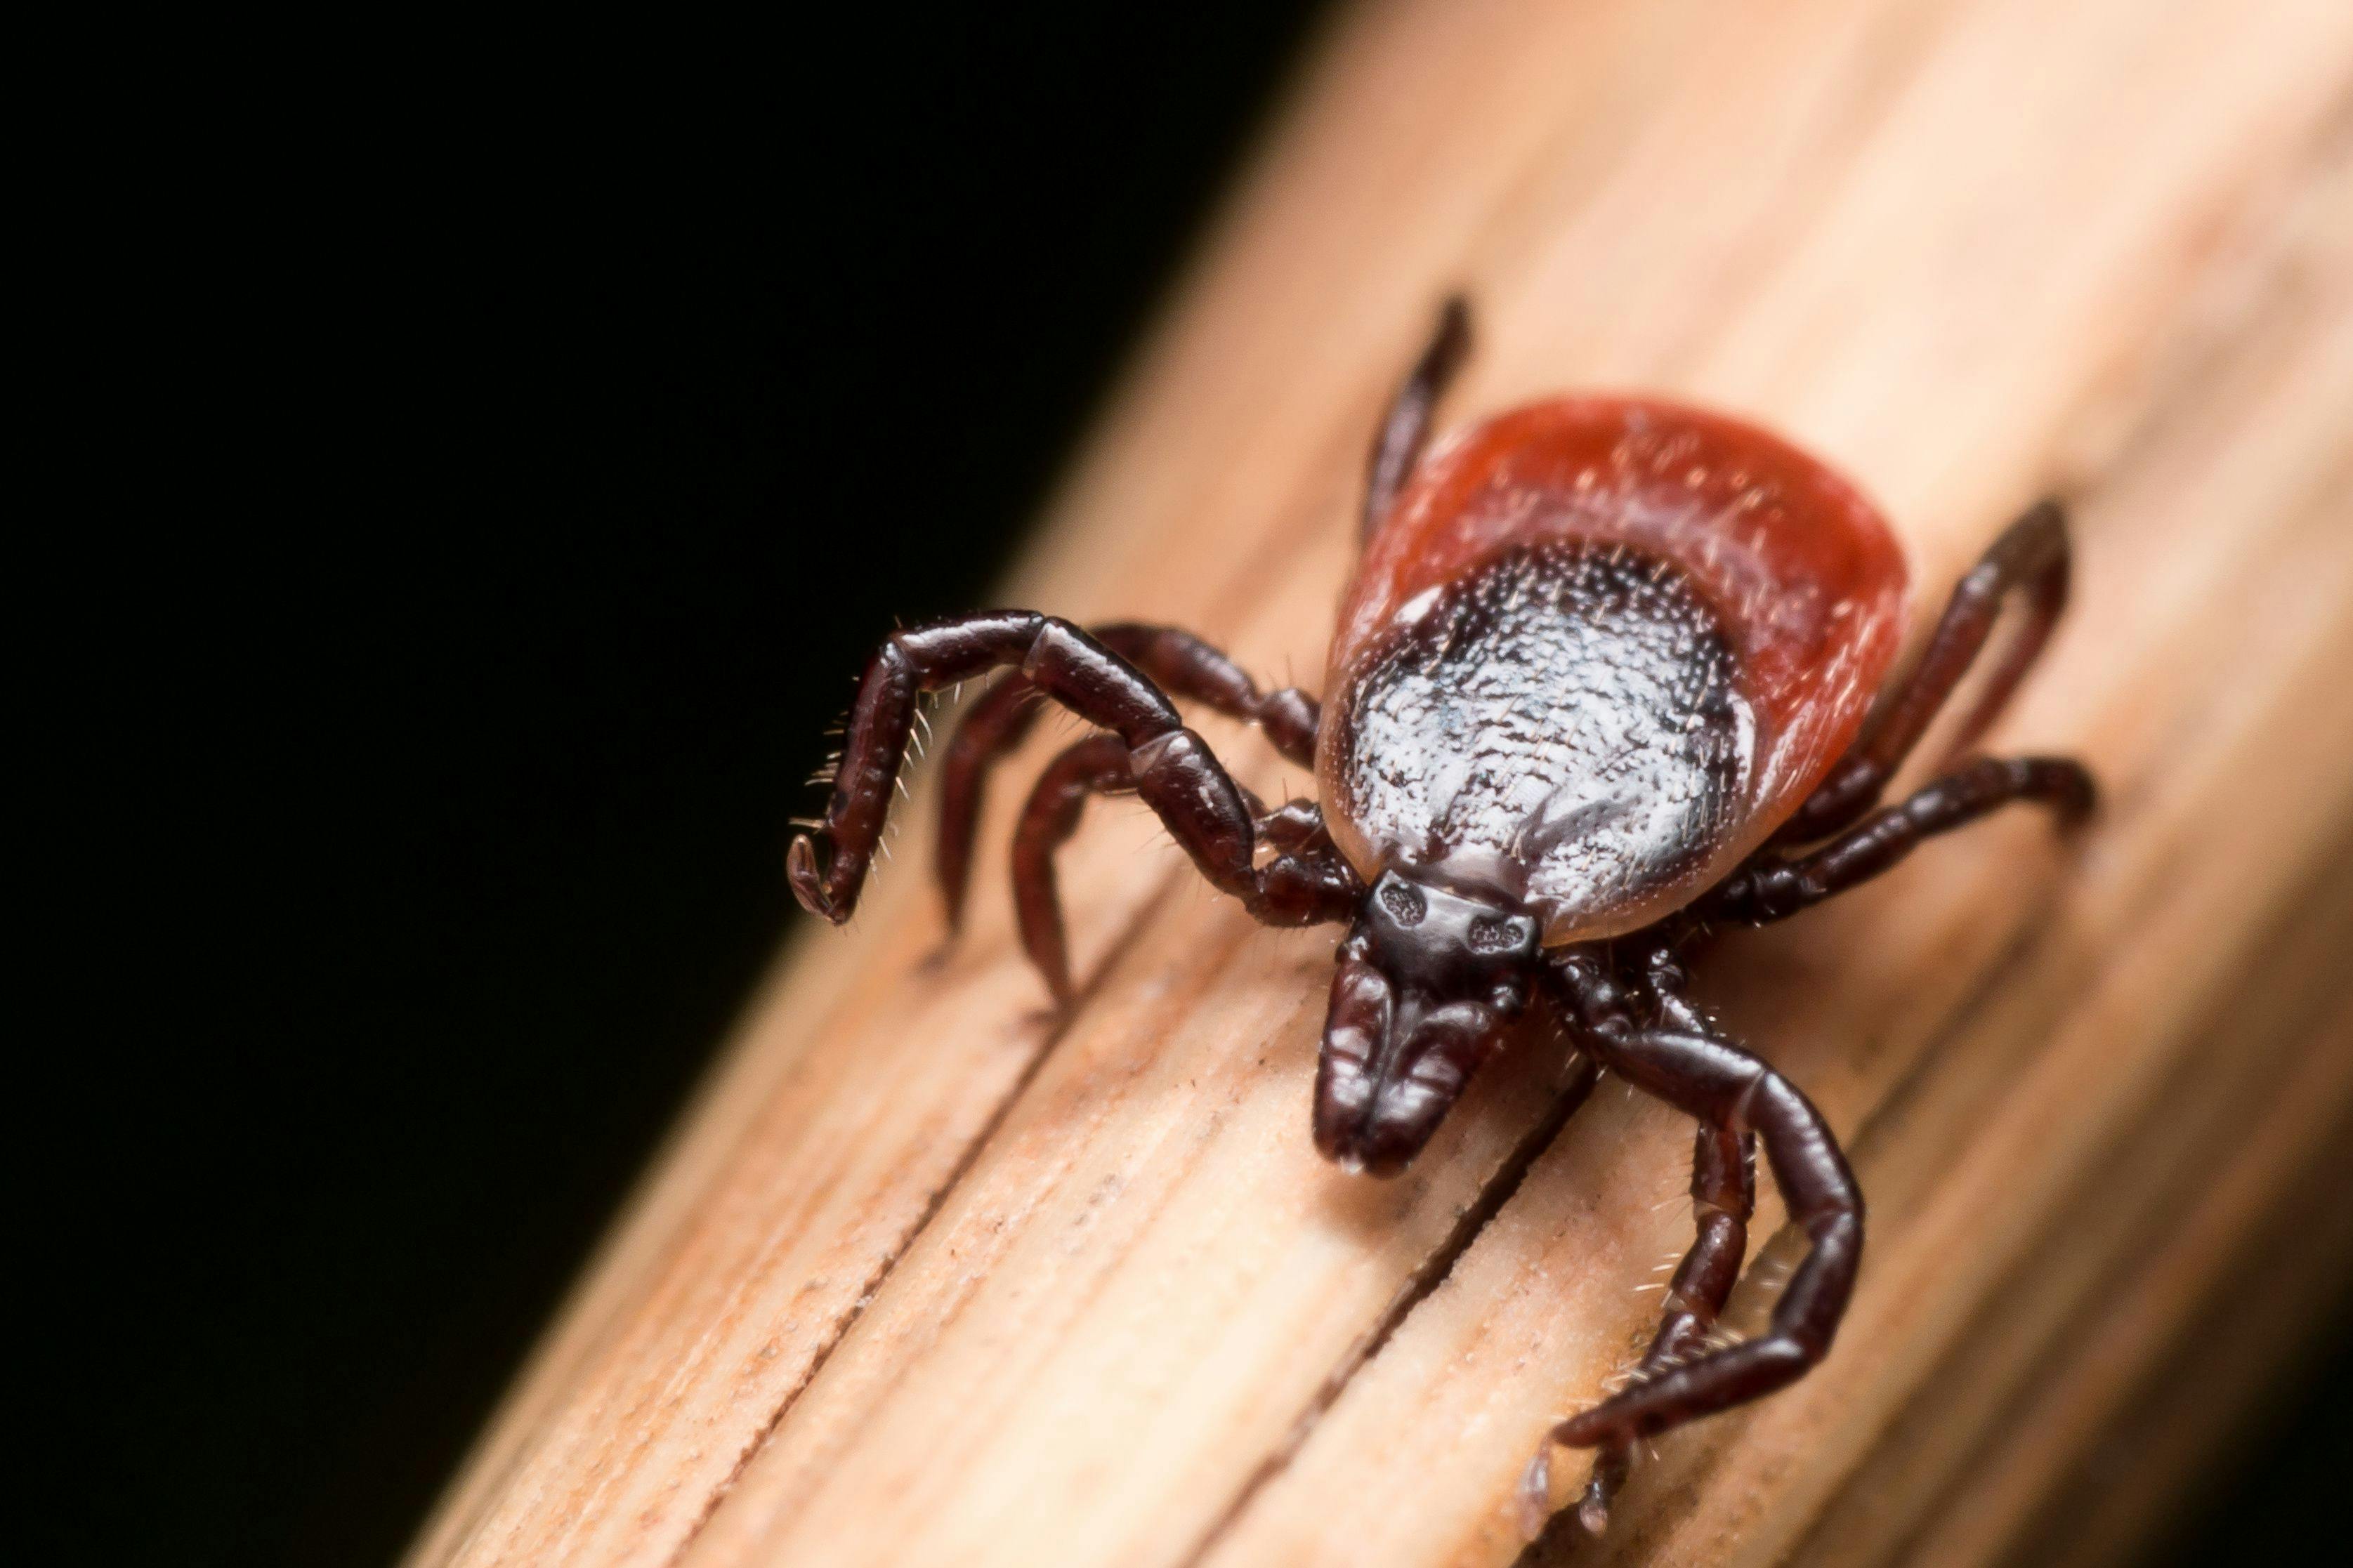 For Tick-Borne Diseases, the Future Is Now: Public Health Watch